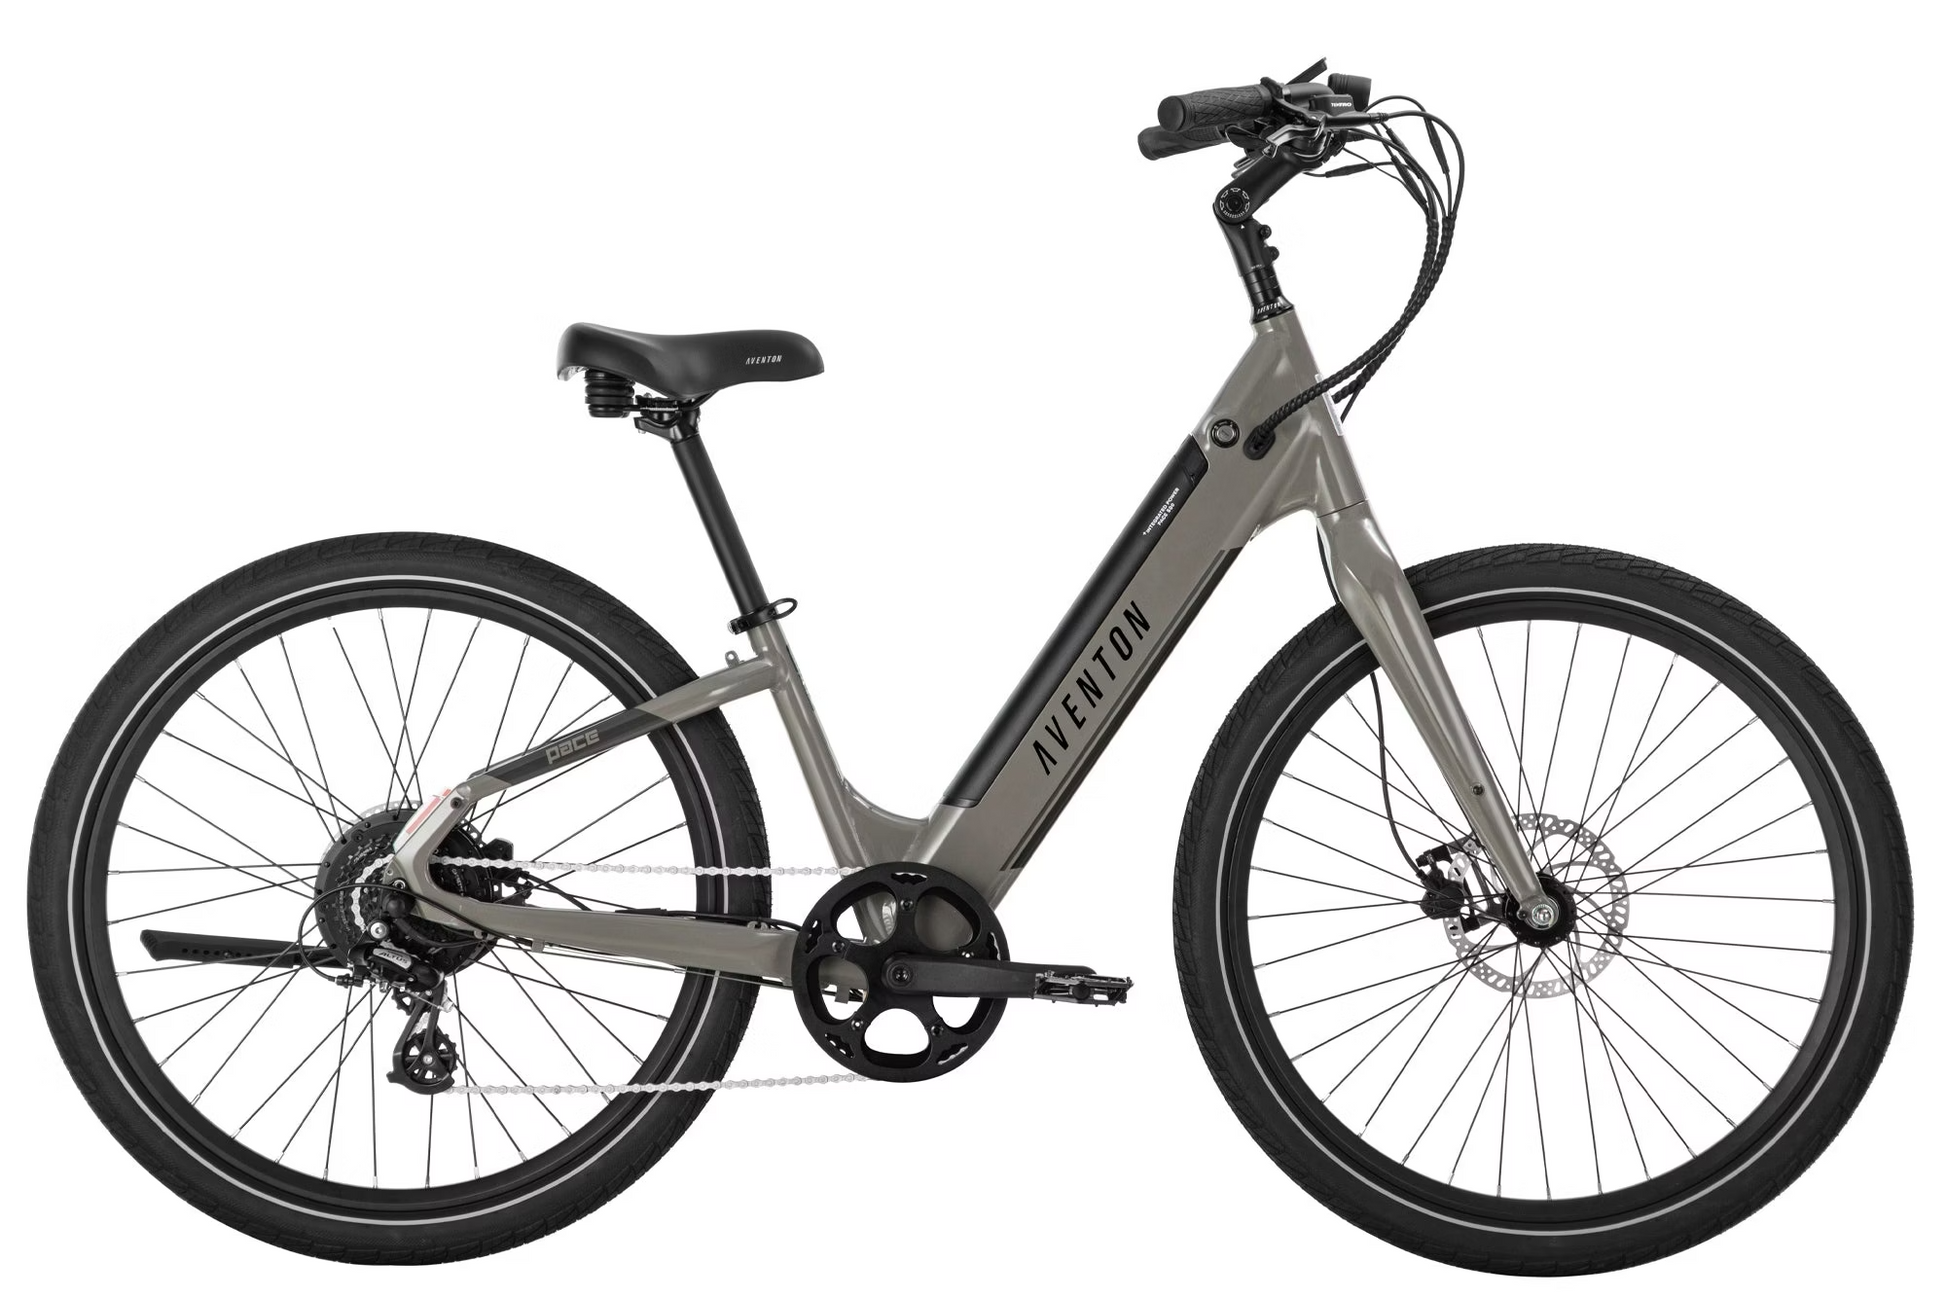 A modern gray electric bike branded "Aventon" with a visible battery pack and a 500W motor, standing upright against a white background.